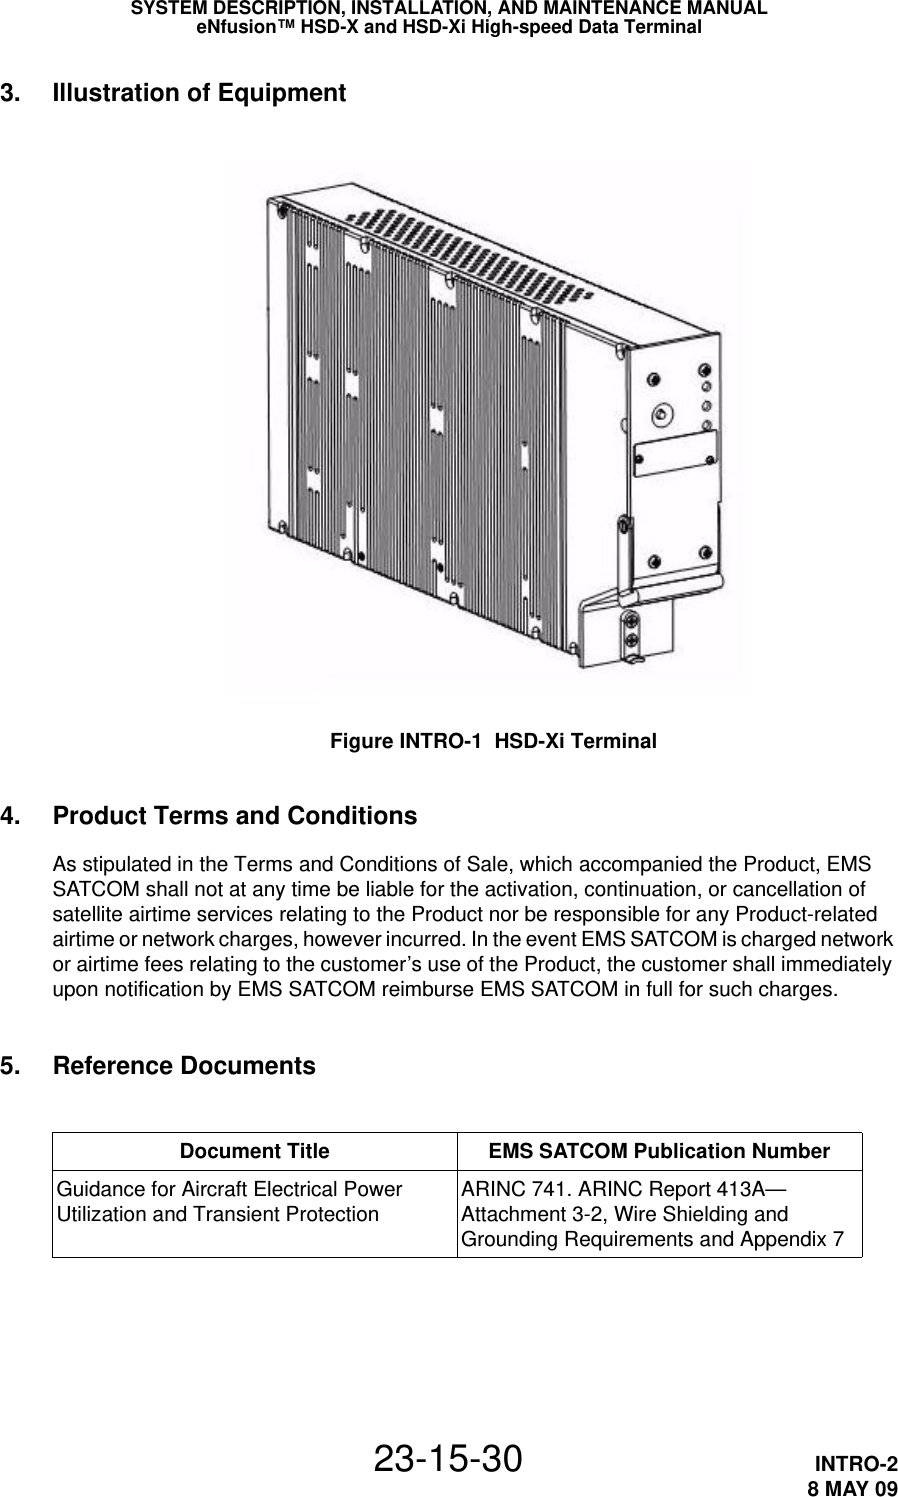 SYSTEM DESCRIPTION, INSTALLATION, AND MAINTENANCE MANUALeNfusion™ HSD-X and HSD-Xi High-speed Data Terminal23-15-30 INTRO-28 MAY 093. Illustration of EquipmentFigure INTRO-1  HSD-Xi Terminal4. Product Terms and ConditionsAs stipulated in the Terms and Conditions of Sale, which accompanied the Product, EMS SATCOM shall not at any time be liable for the activation, continuation, or cancellation of satellite airtime services relating to the Product nor be responsible for any Product-related airtime or network charges, however incurred. In the event EMS SATCOM is charged network or airtime fees relating to the customer’s use of the Product, the customer shall immediately upon notification by EMS SATCOM reimburse EMS SATCOM in full for such charges.5. Reference DocumentsDocument Title EMS SATCOM Publication NumberGuidance for Aircraft Electrical Power Utilization and Transient Protection ARINC 741. ARINC Report 413A—Attachment 3-2, Wire Shielding and Grounding Requirements and Appendix 7